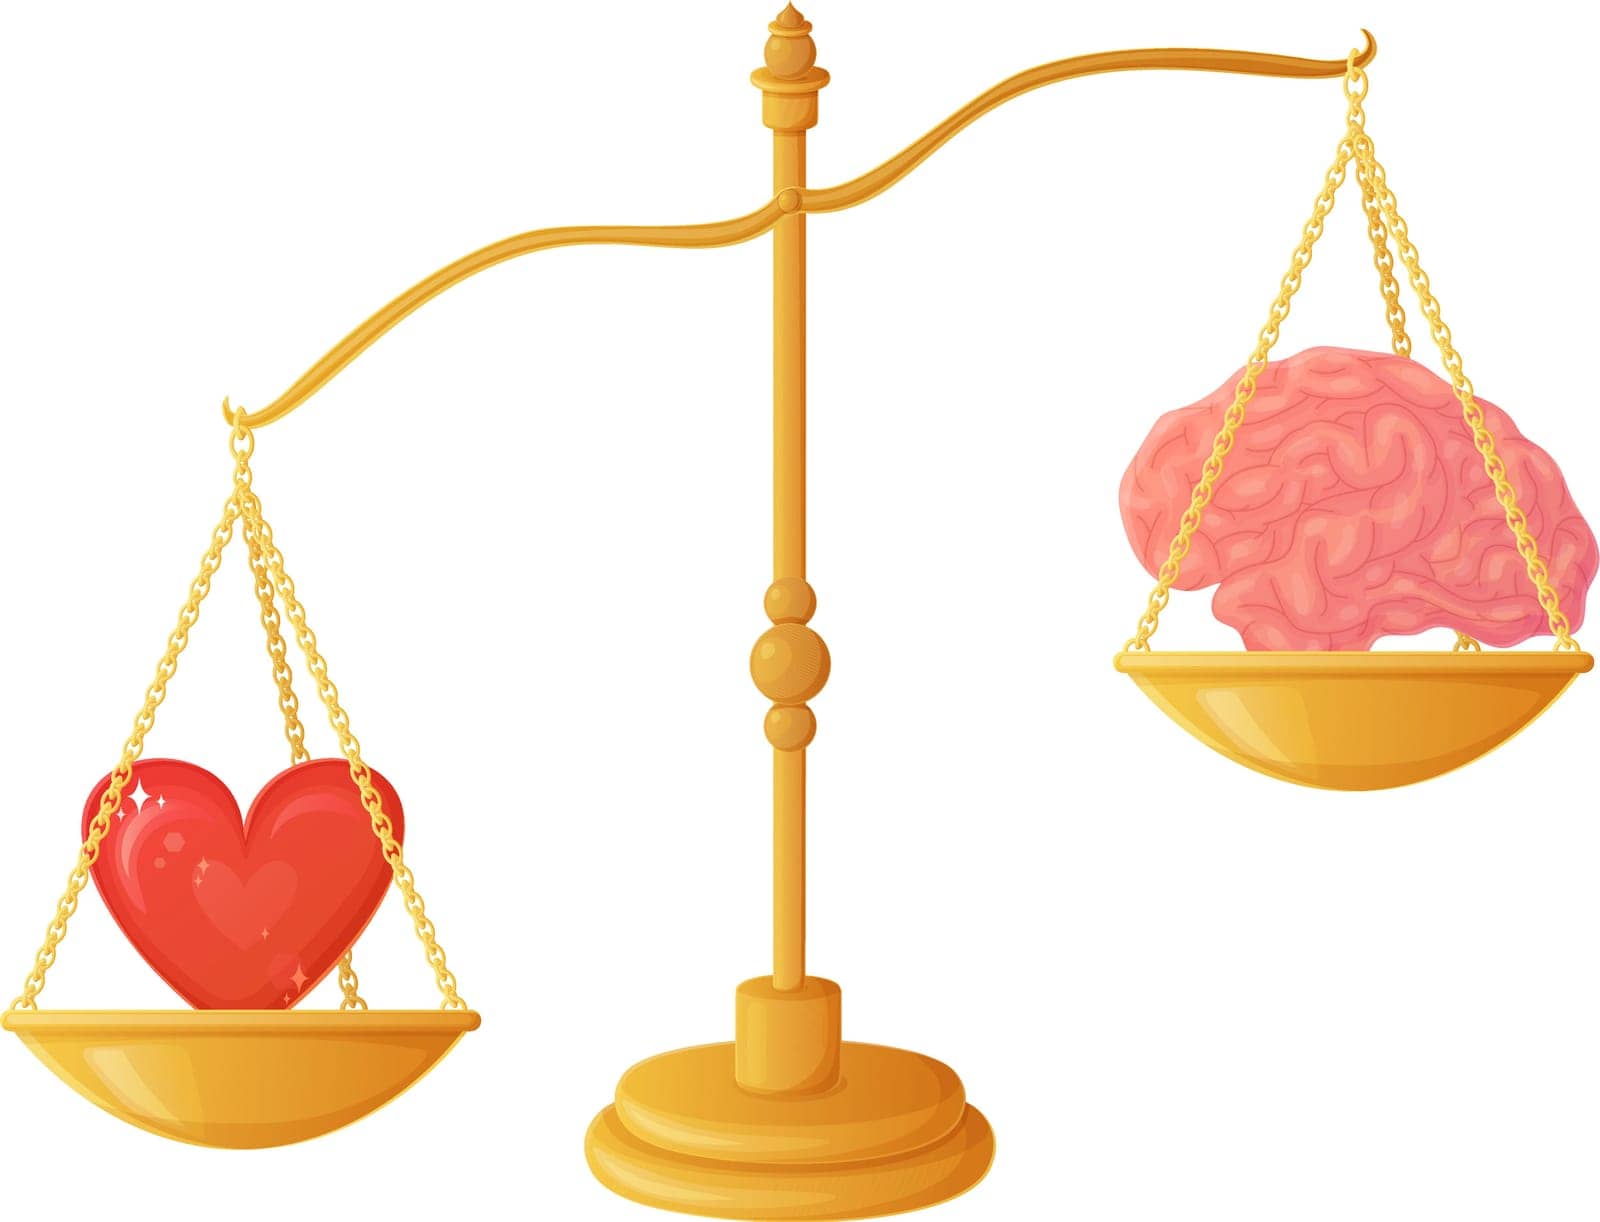 The intellect outweighs the heart on the scales. Brain heart balance illustration concept. Hard to make choice symbol. by Daaridna